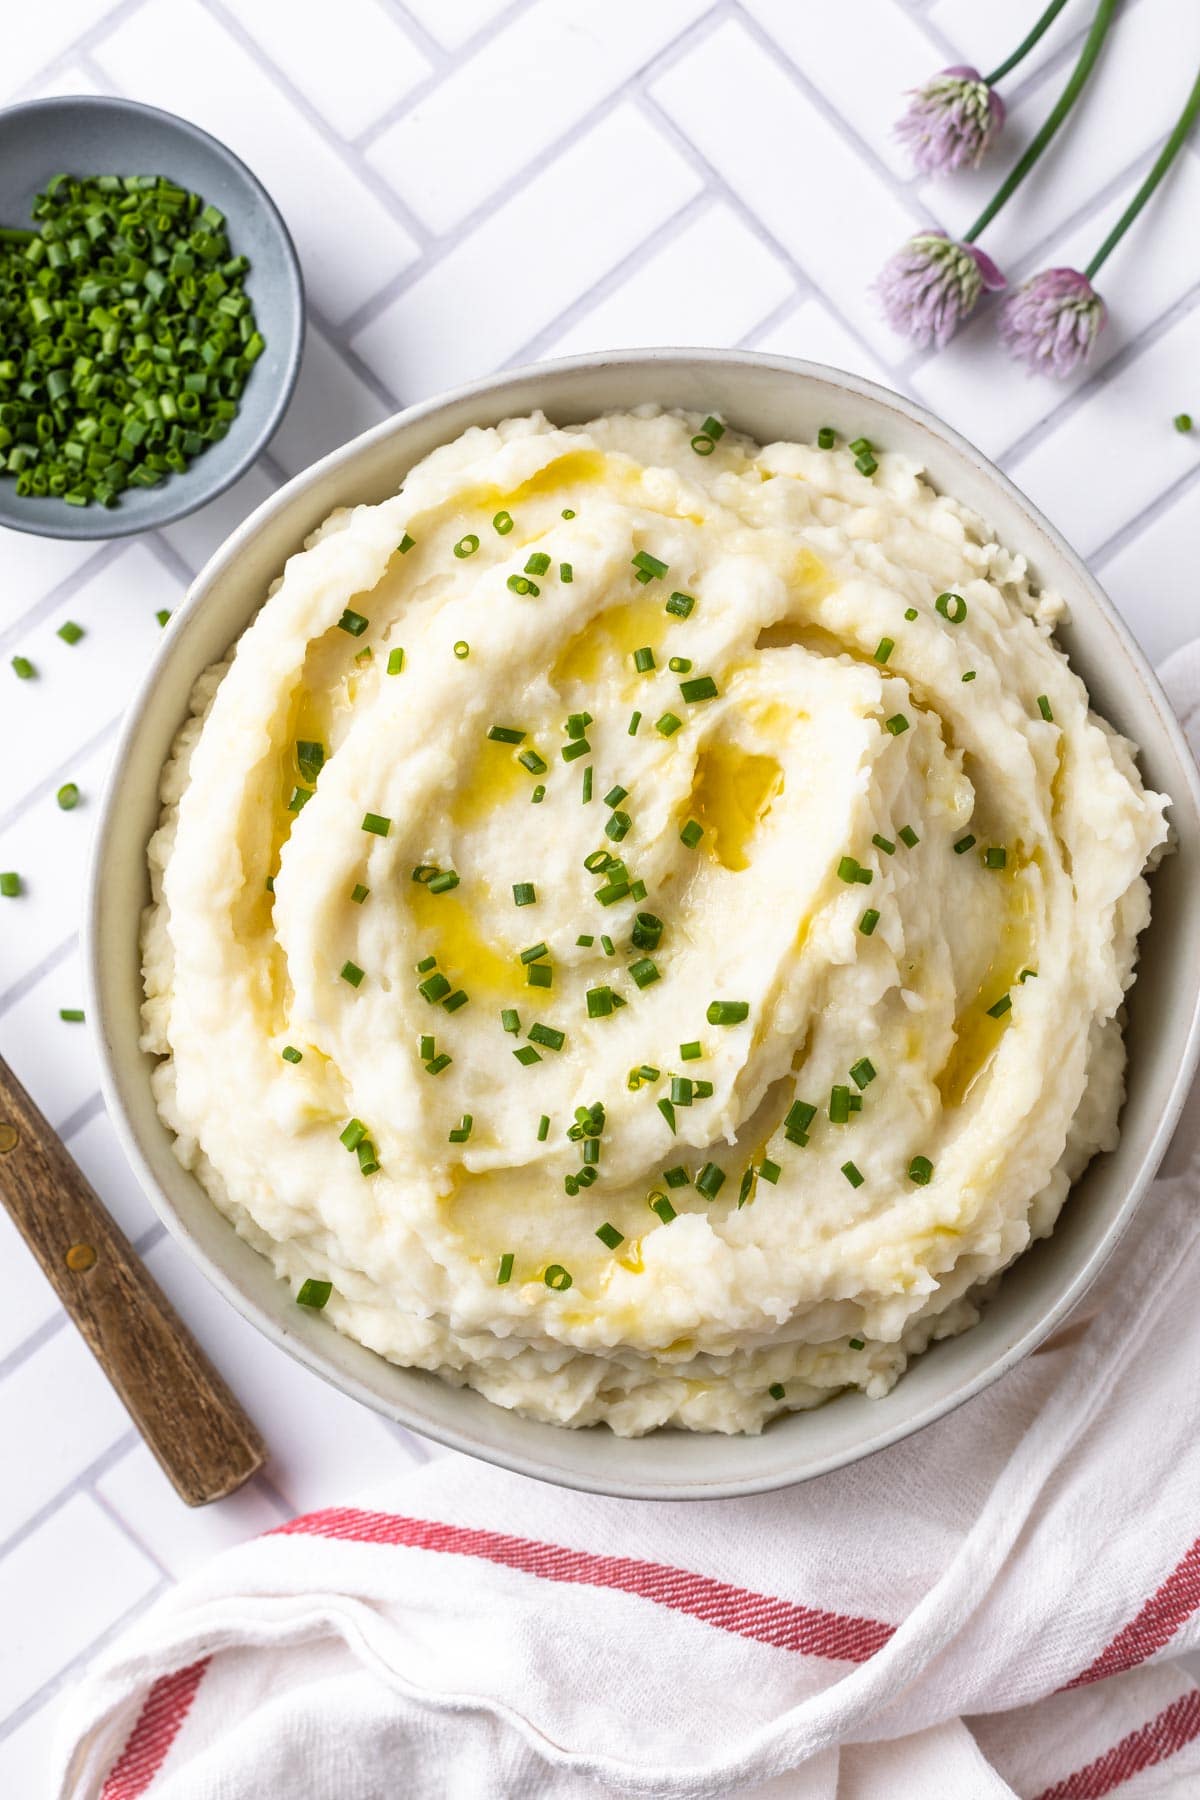 mashed potatoes drizzled with olive oil and garnished with chives on a tile surface